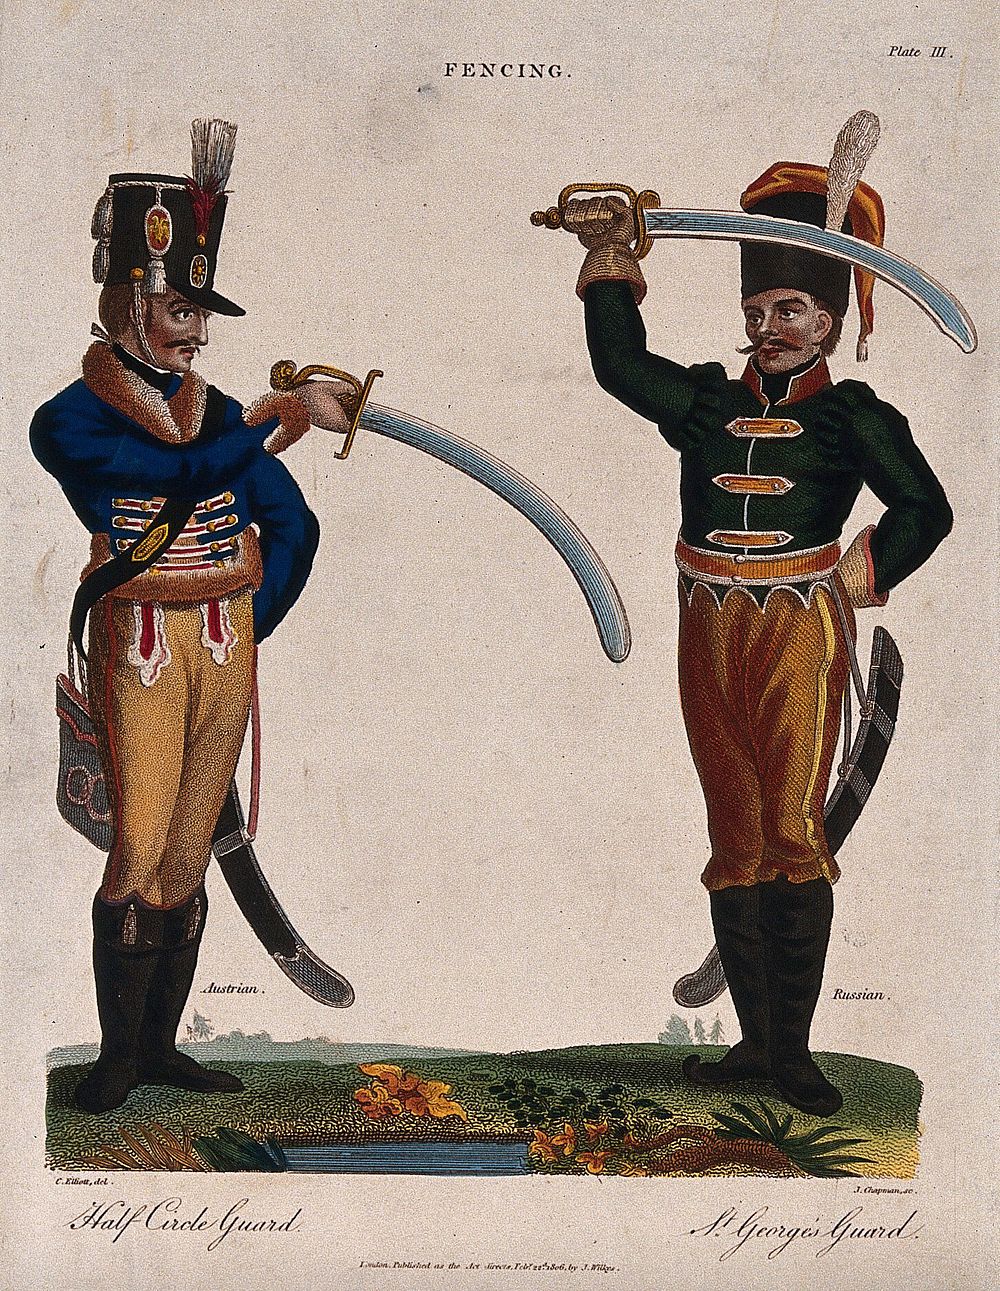 An Austrian soldier facing a Russian soldier with their swords raised in their hands. Coloured engraving by J. Chapman after…